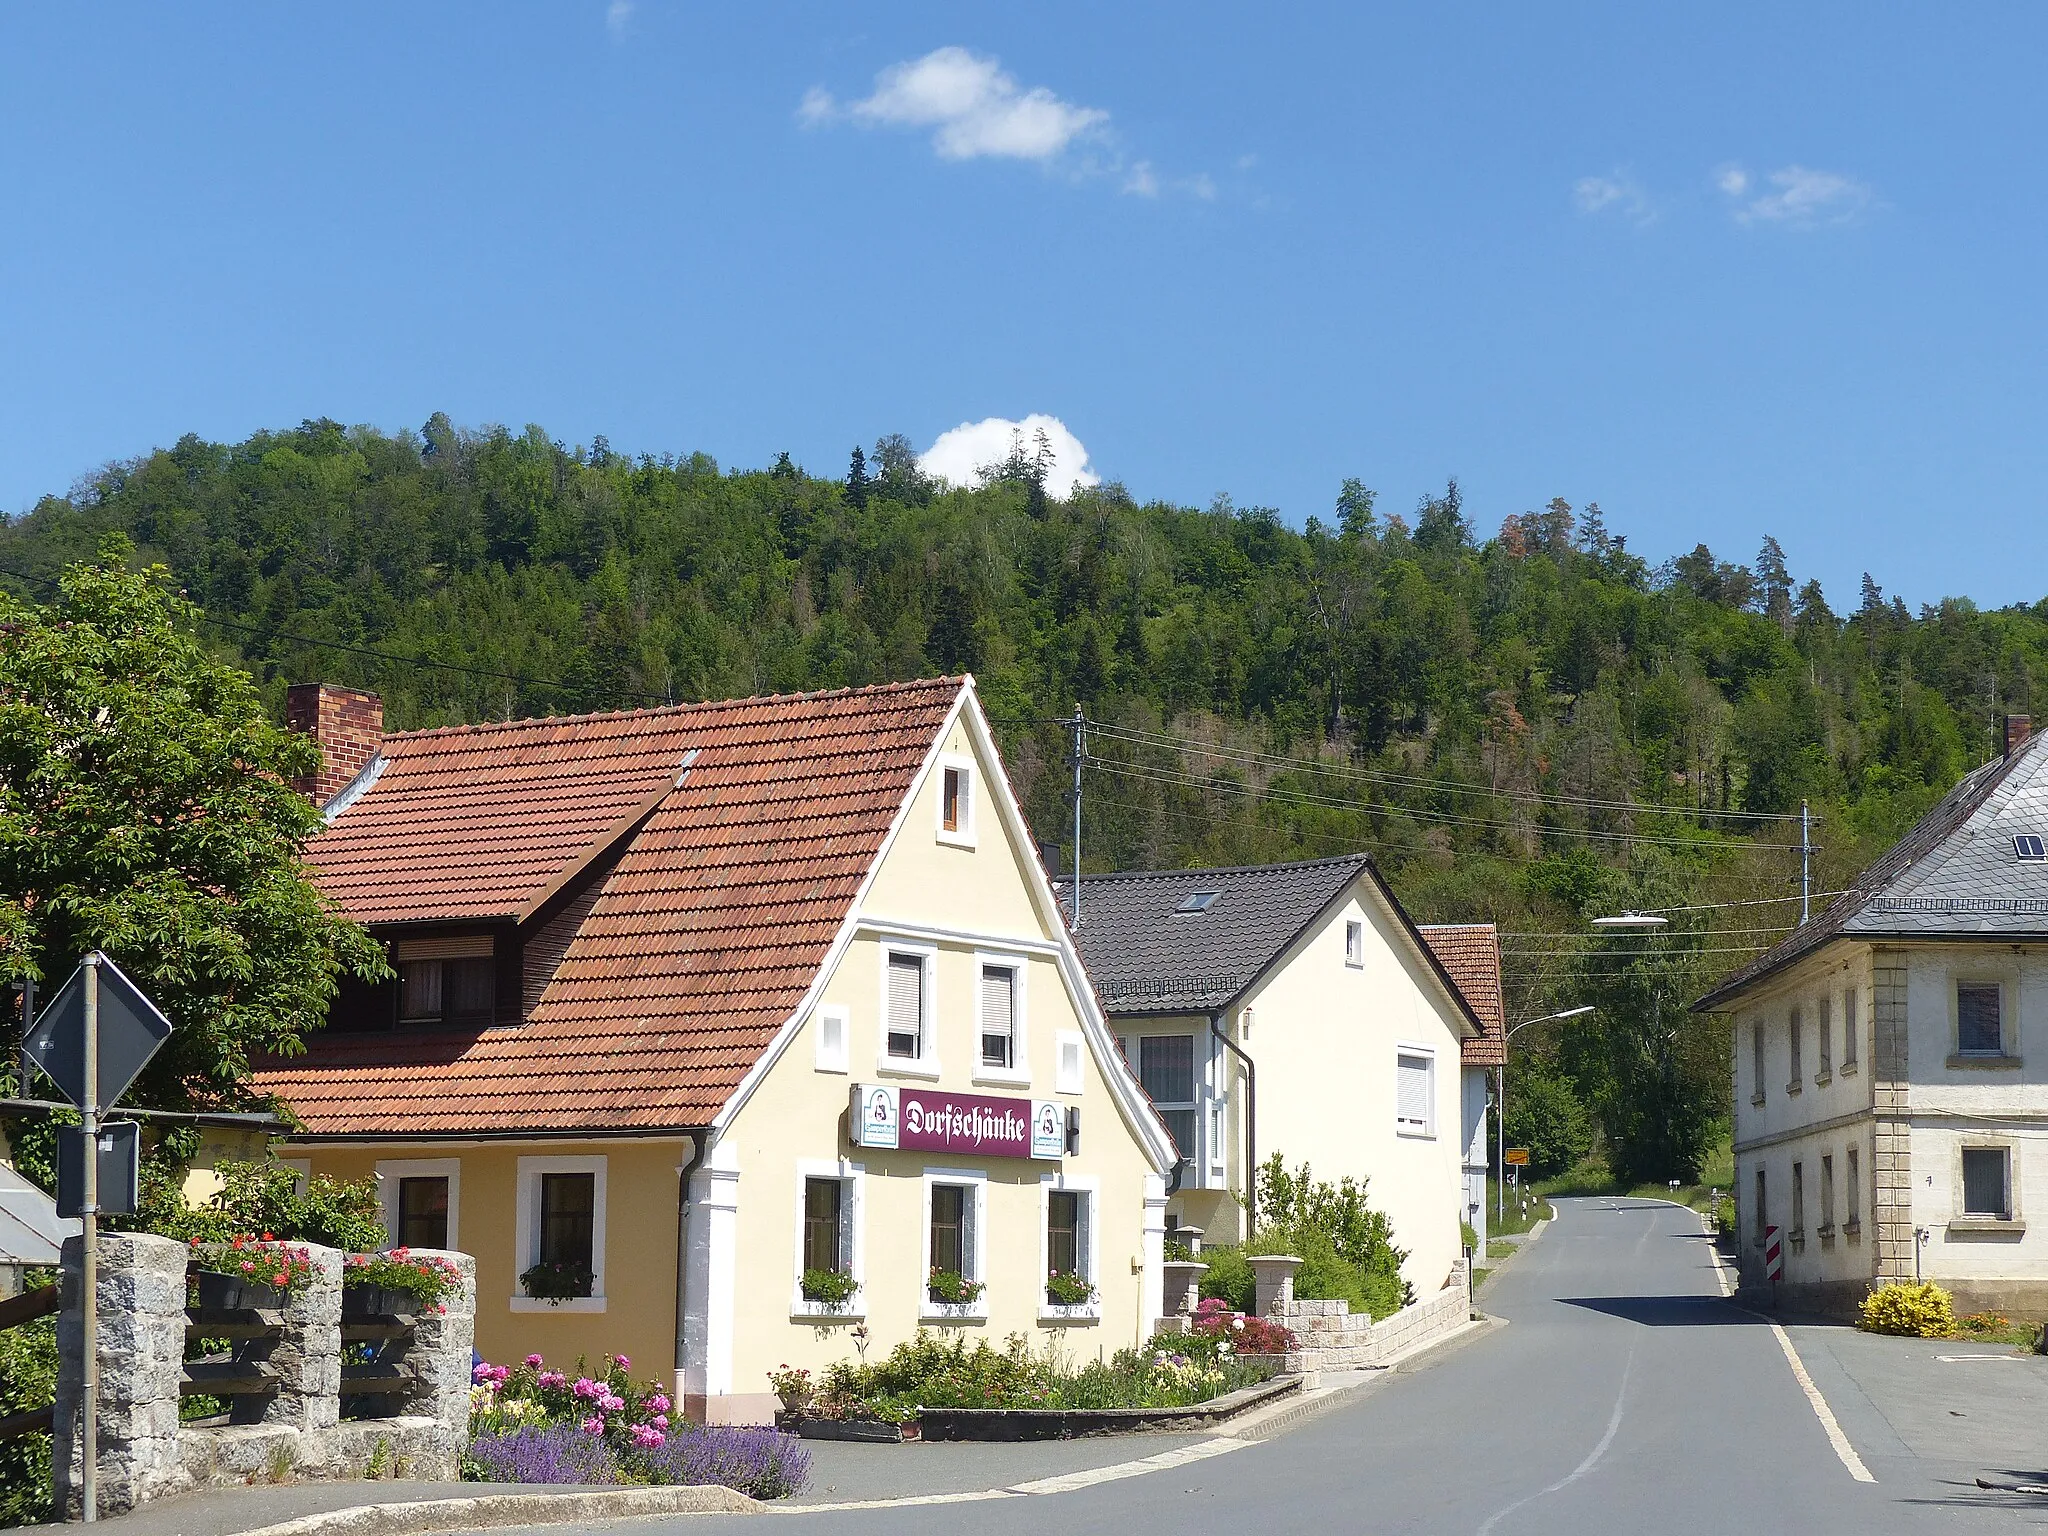 Photo showing: The village Zettlitz, a district of the municipality of Rugendorf.